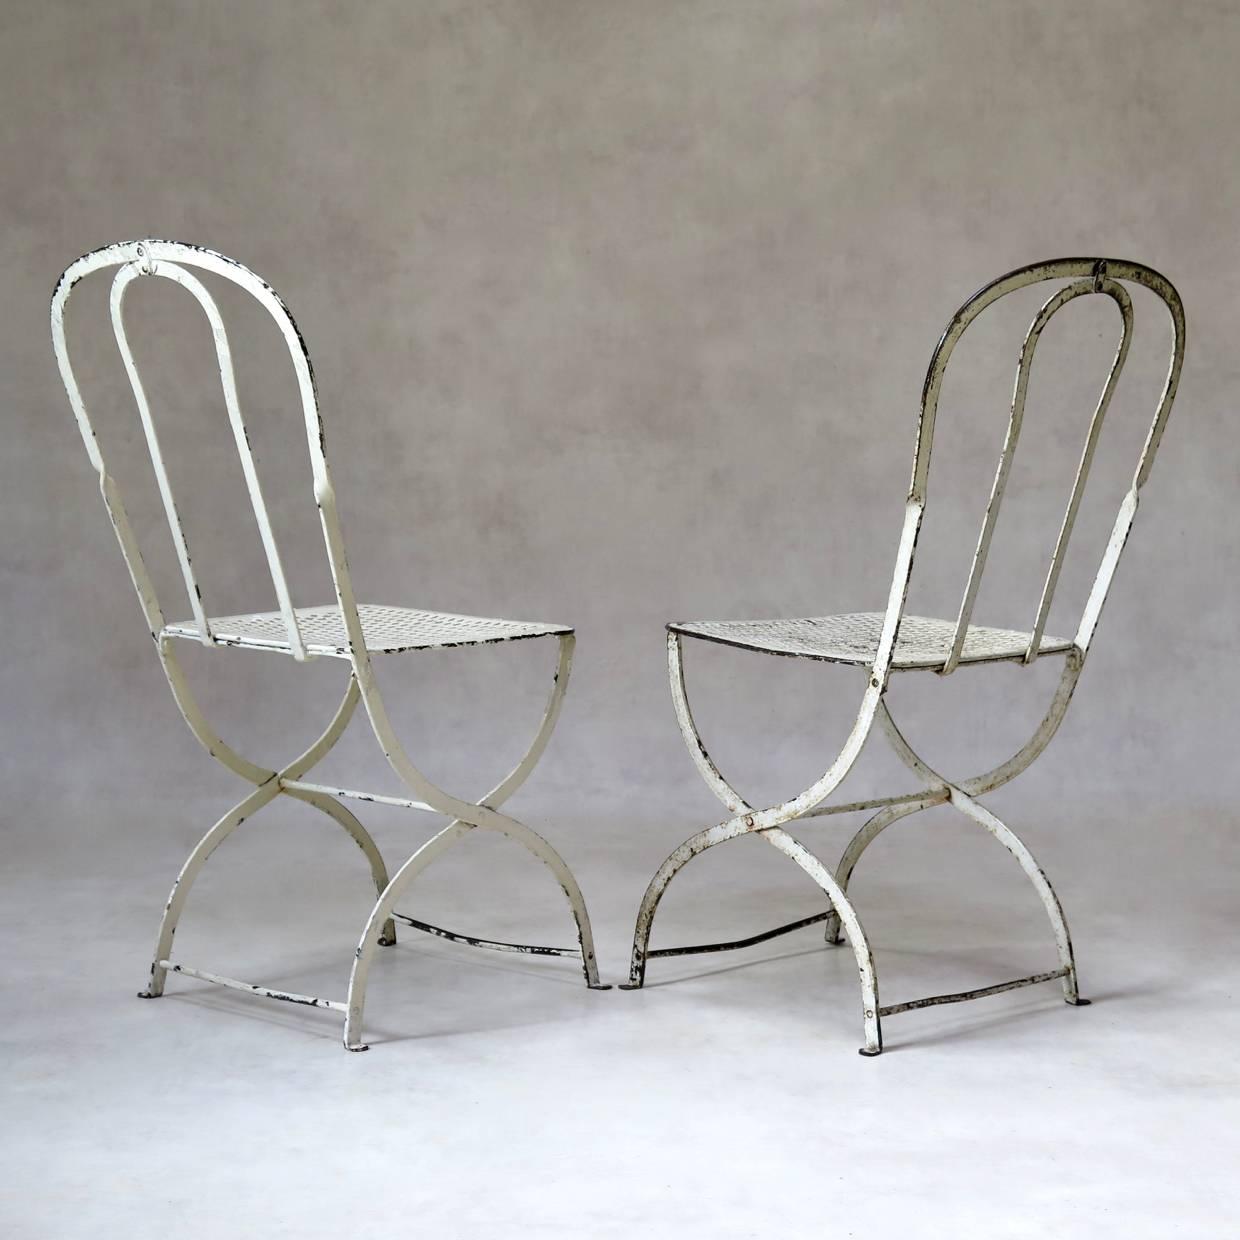 20th Century Set of 14 Garden Chairs, France, 1920s